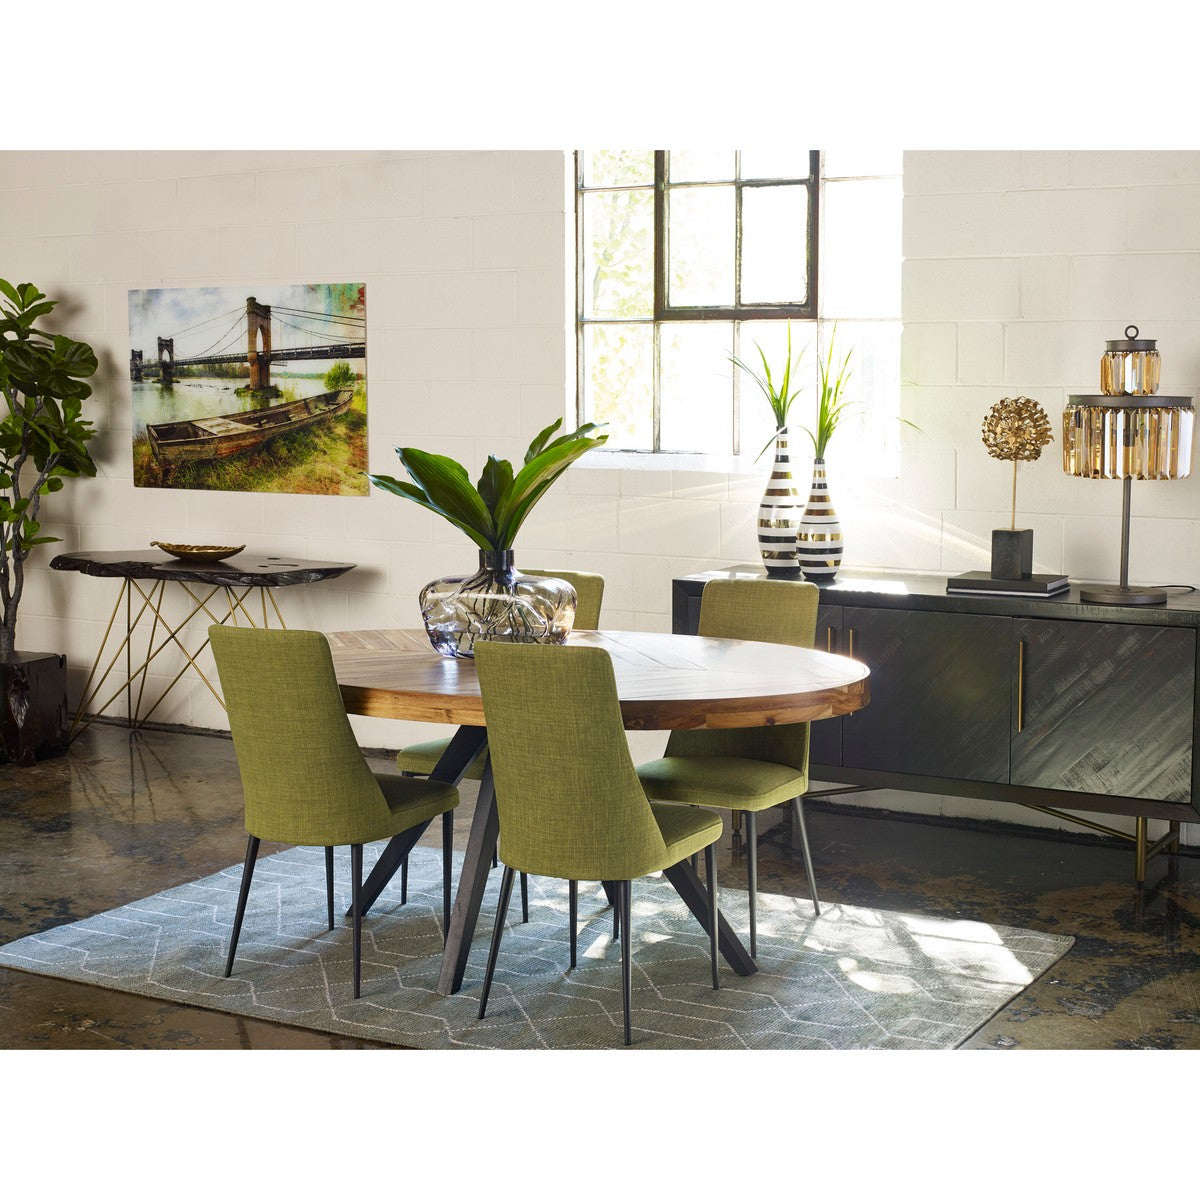 Moe's Home Collection Parq Oval Dining Table - TL-1019-14 - Moe's Home Collection - Dining Tables - Minimal And Modern - 1